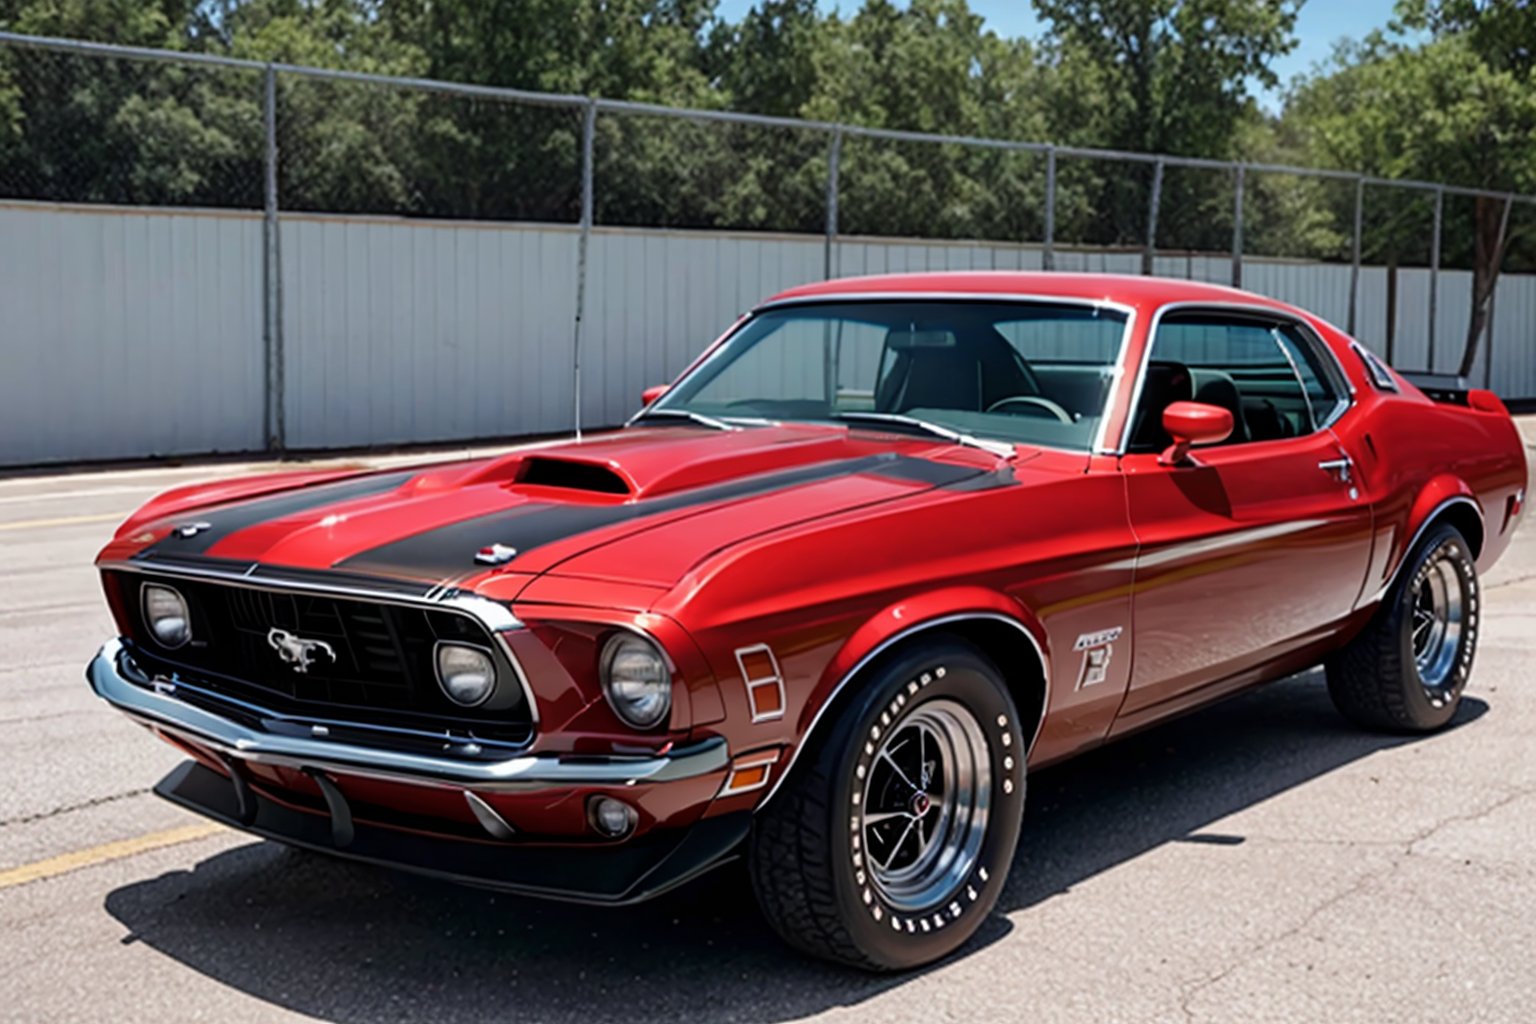 1973 Ford Mustang, red